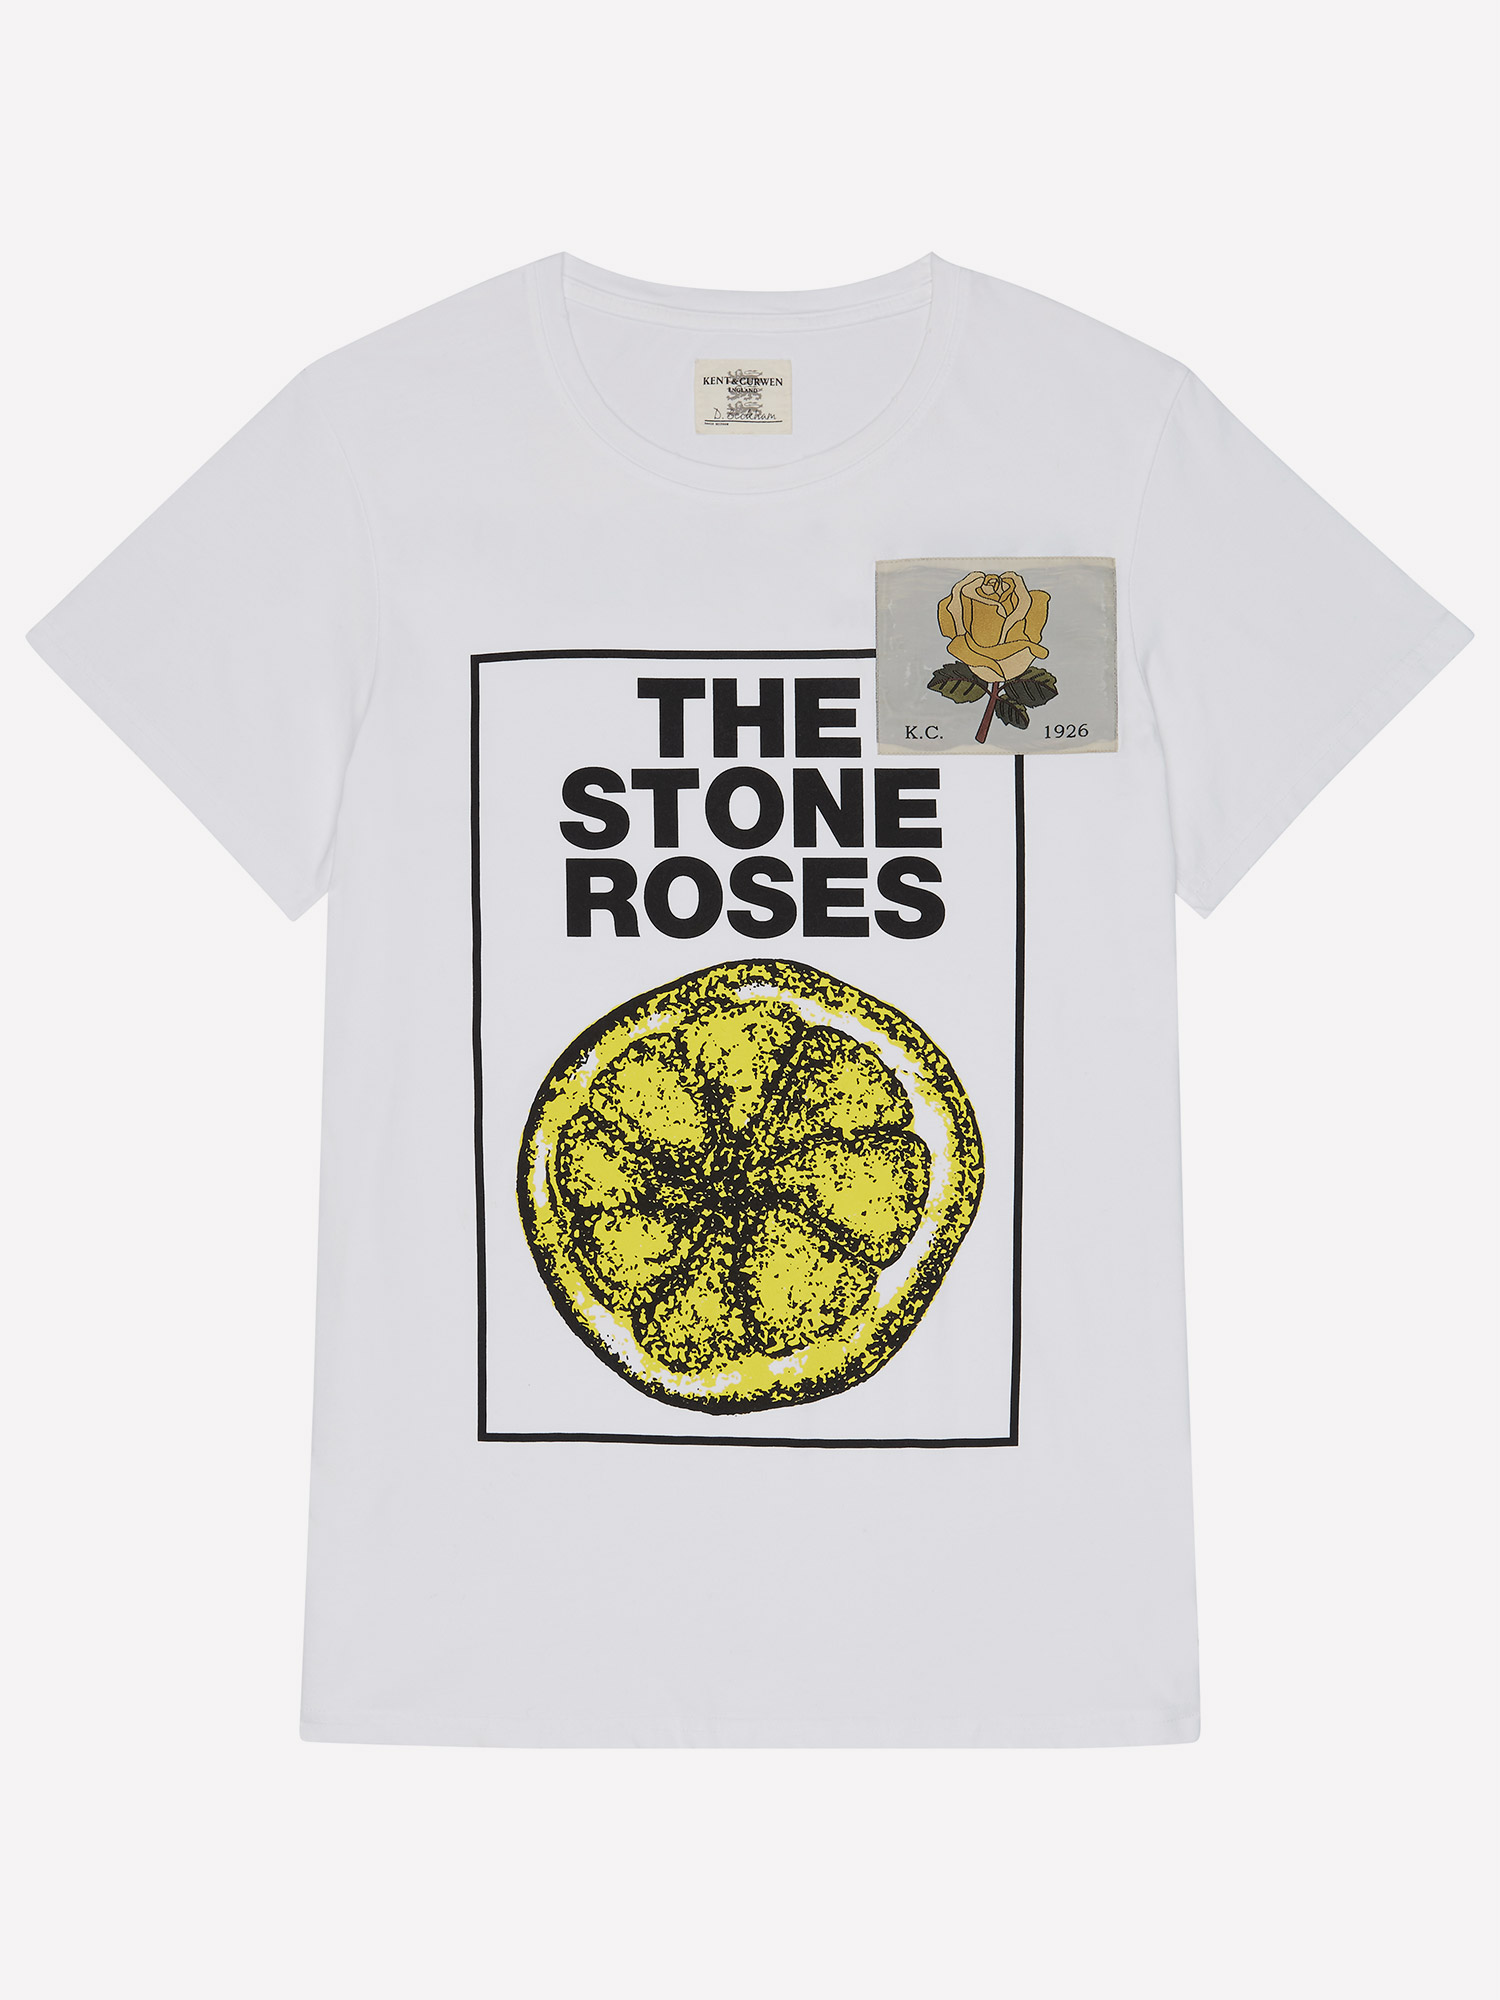 The Stone Roses x Kent & Curwen 